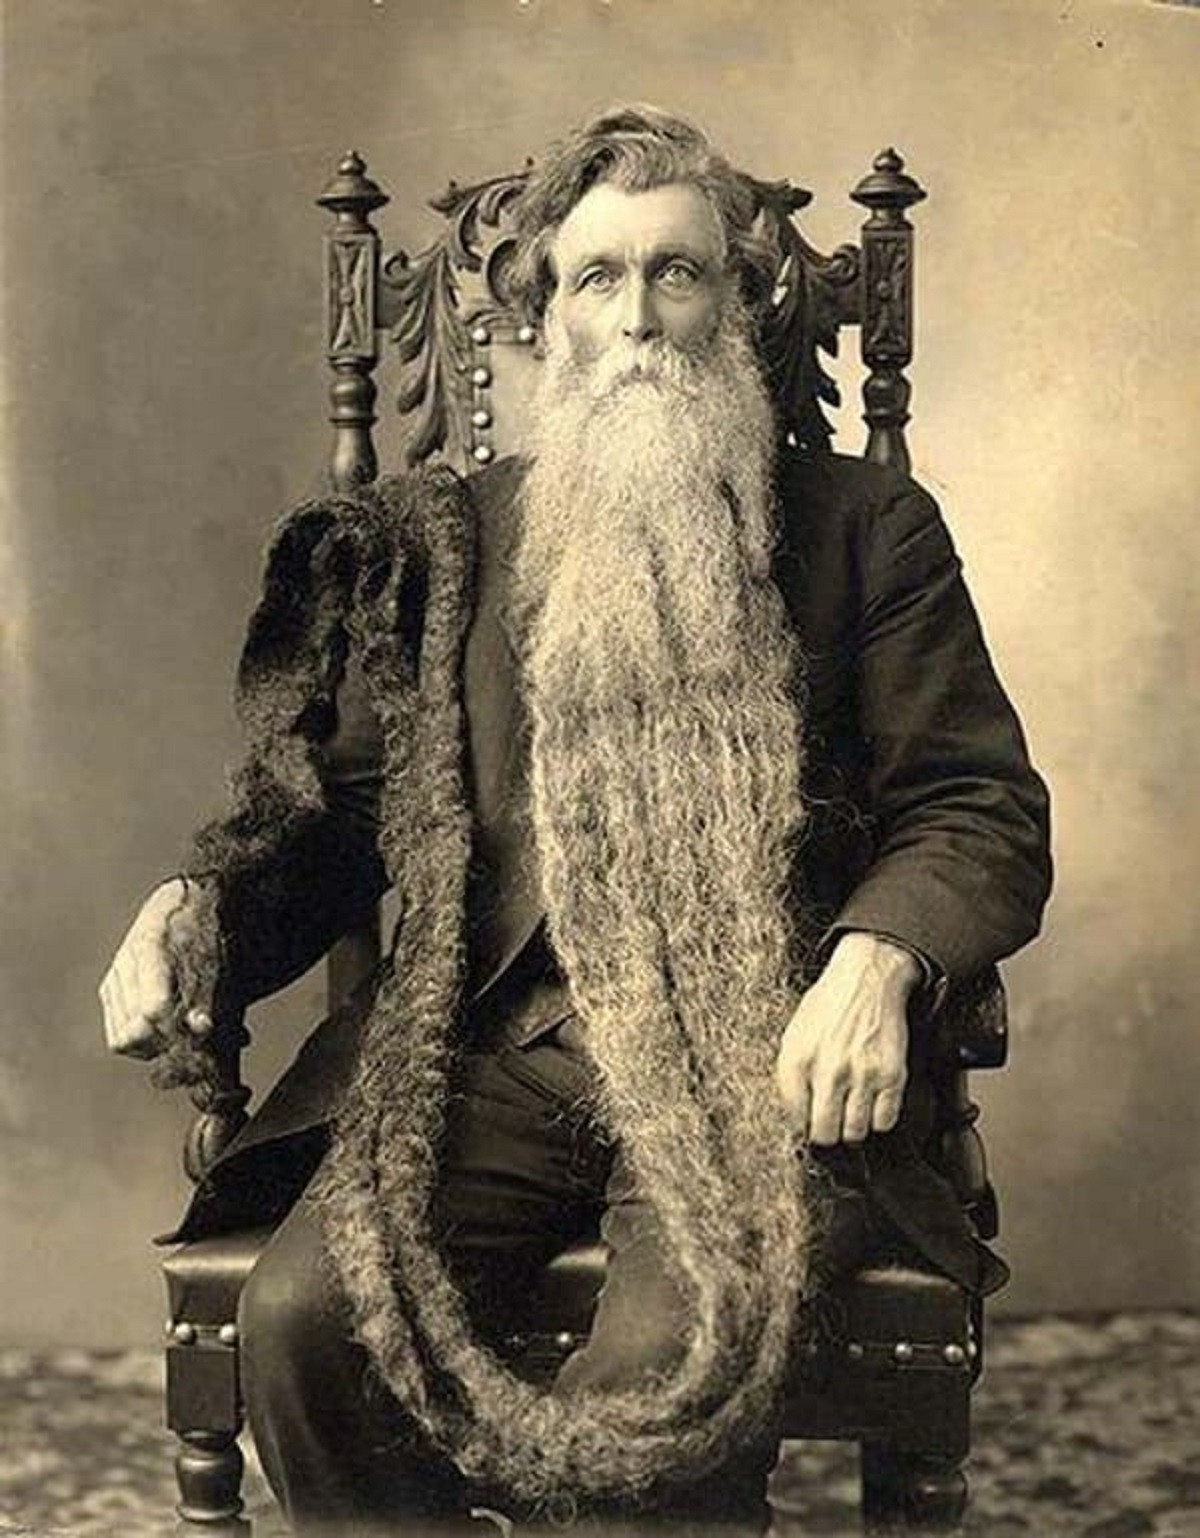 Hans Langseth, Once The Man With The World’s Longest Beard, Circa 1912